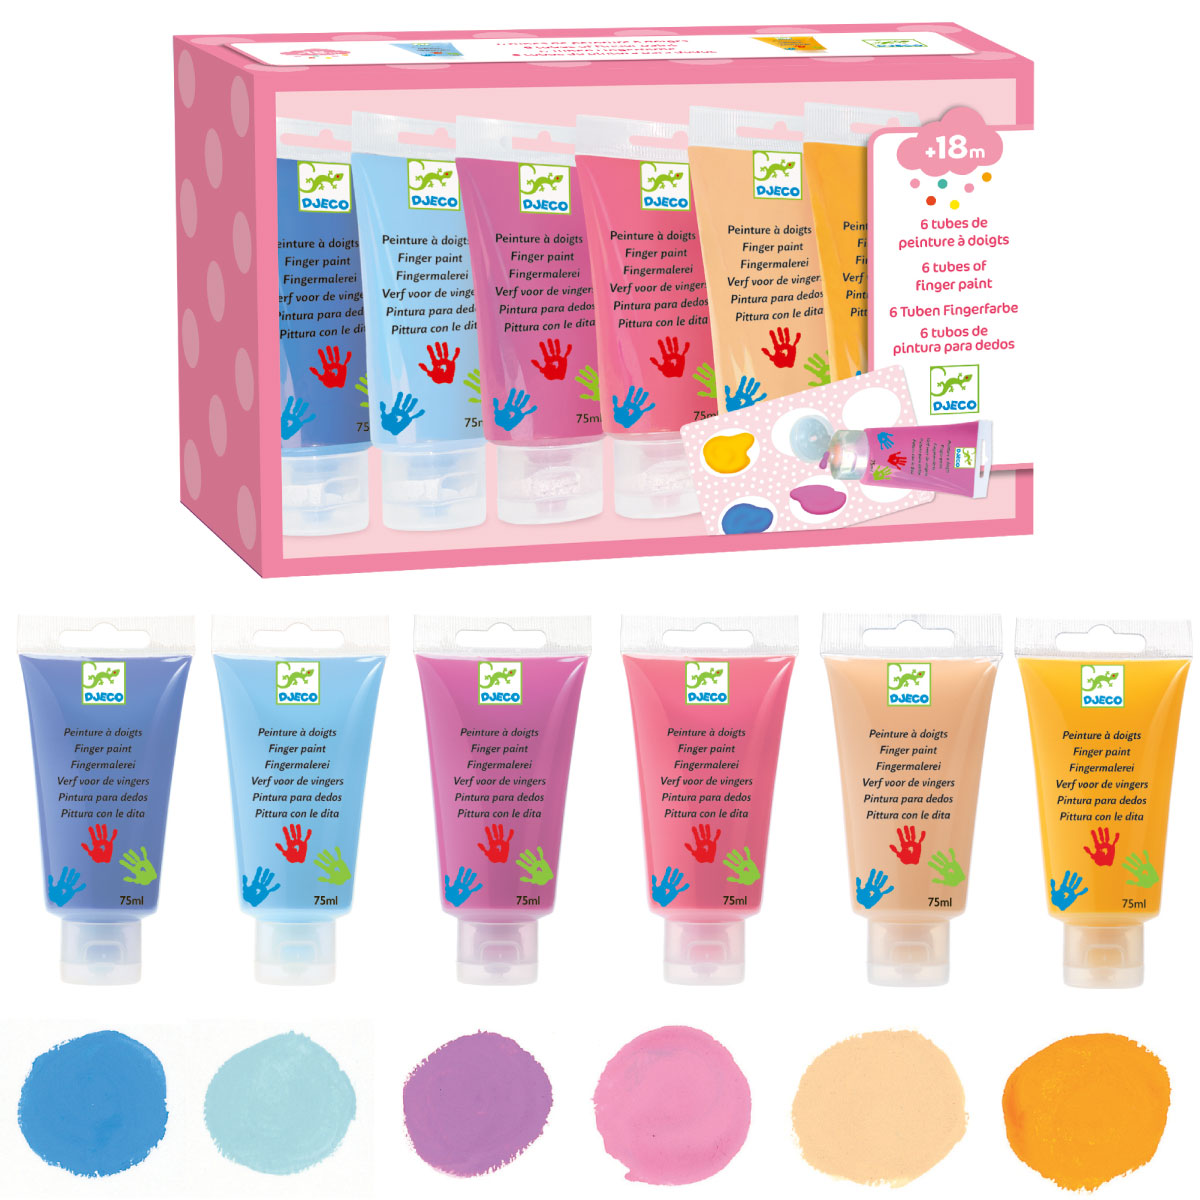 Djeco 6 Tubes of Finger Paint - Sweet Pastels